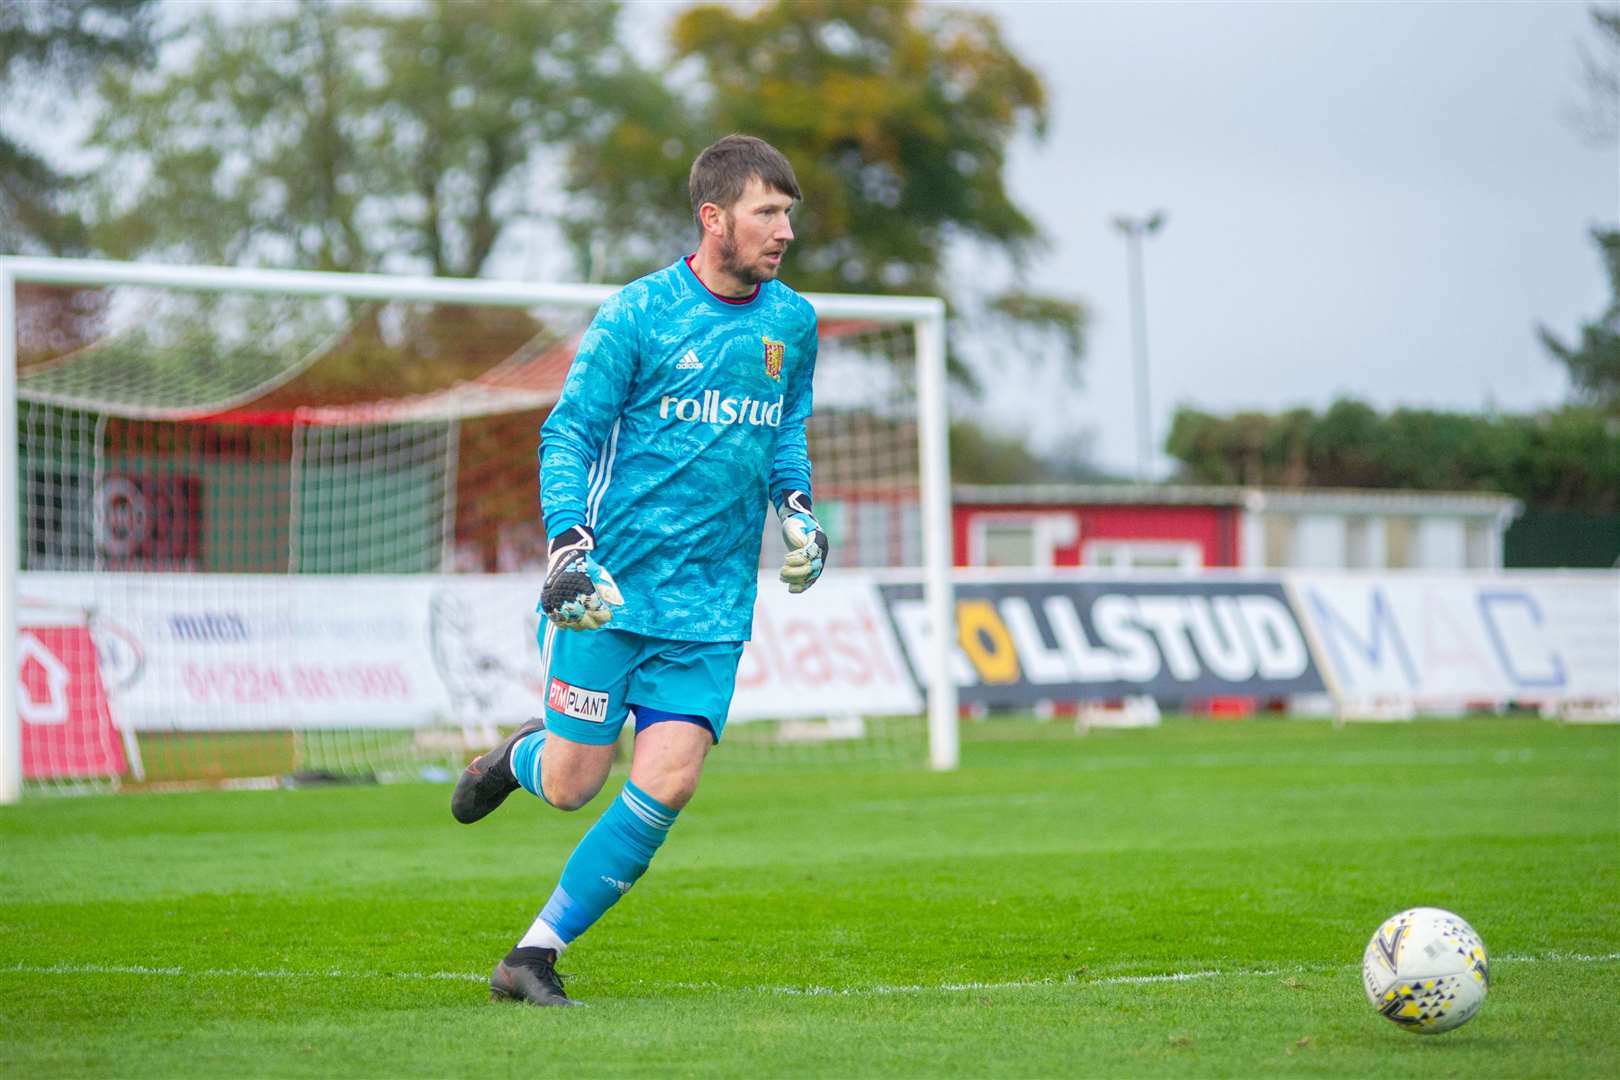 Formartine keeper Kevin Main...Formartine United FC (1) vs Rothes FC (2) - Highland League Cup semi final - North Lodge Park 17/10/2020...Picture: Daniel Forsyth..